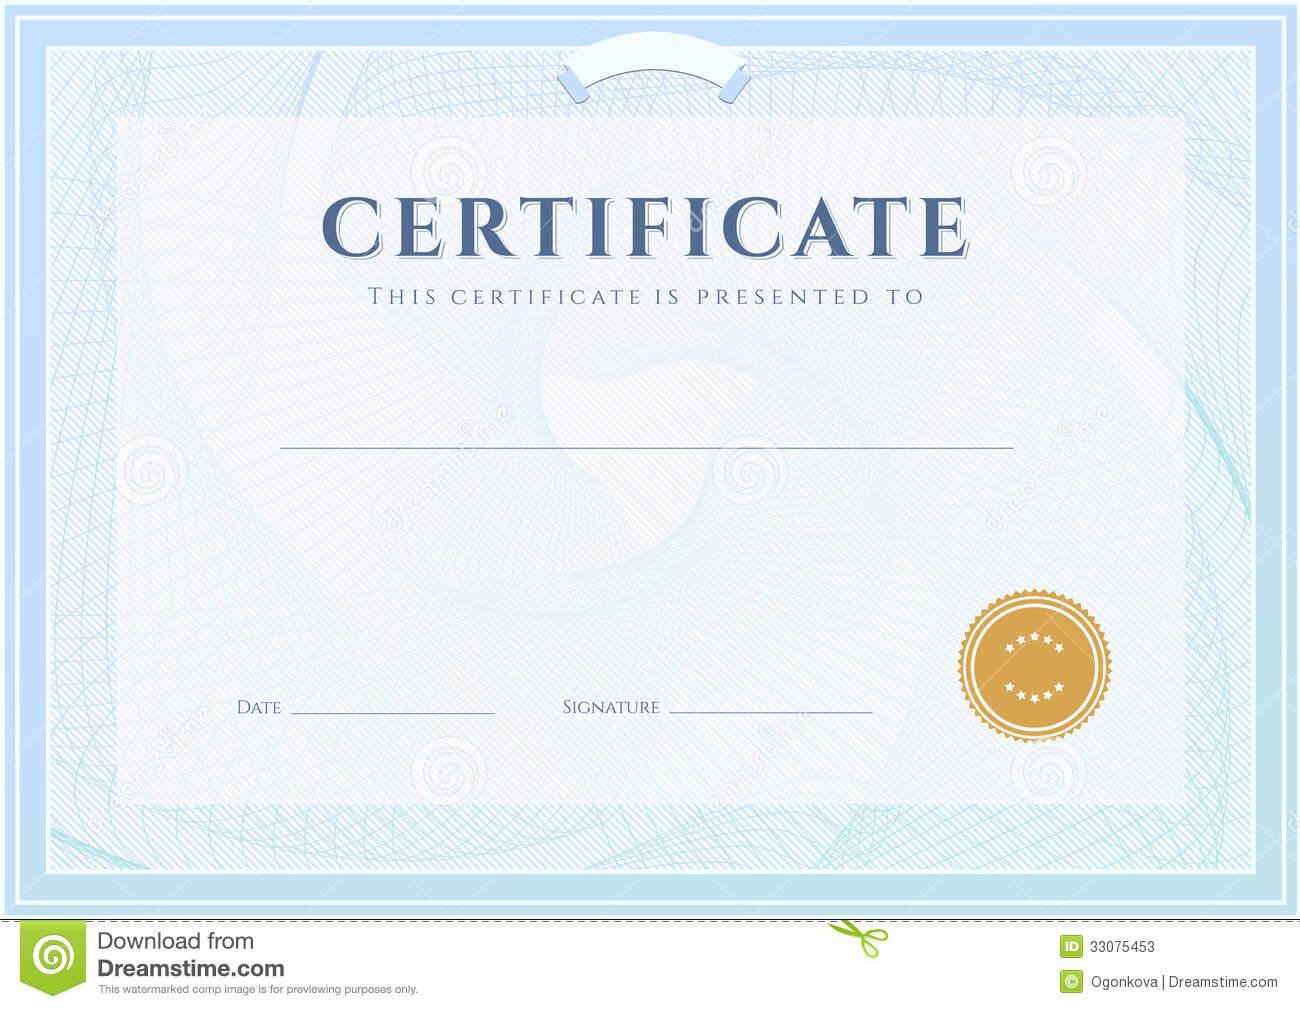 Certificate Of Authenticity Templates Word Excel Samples Regarding Certificate Of Authenticity Template